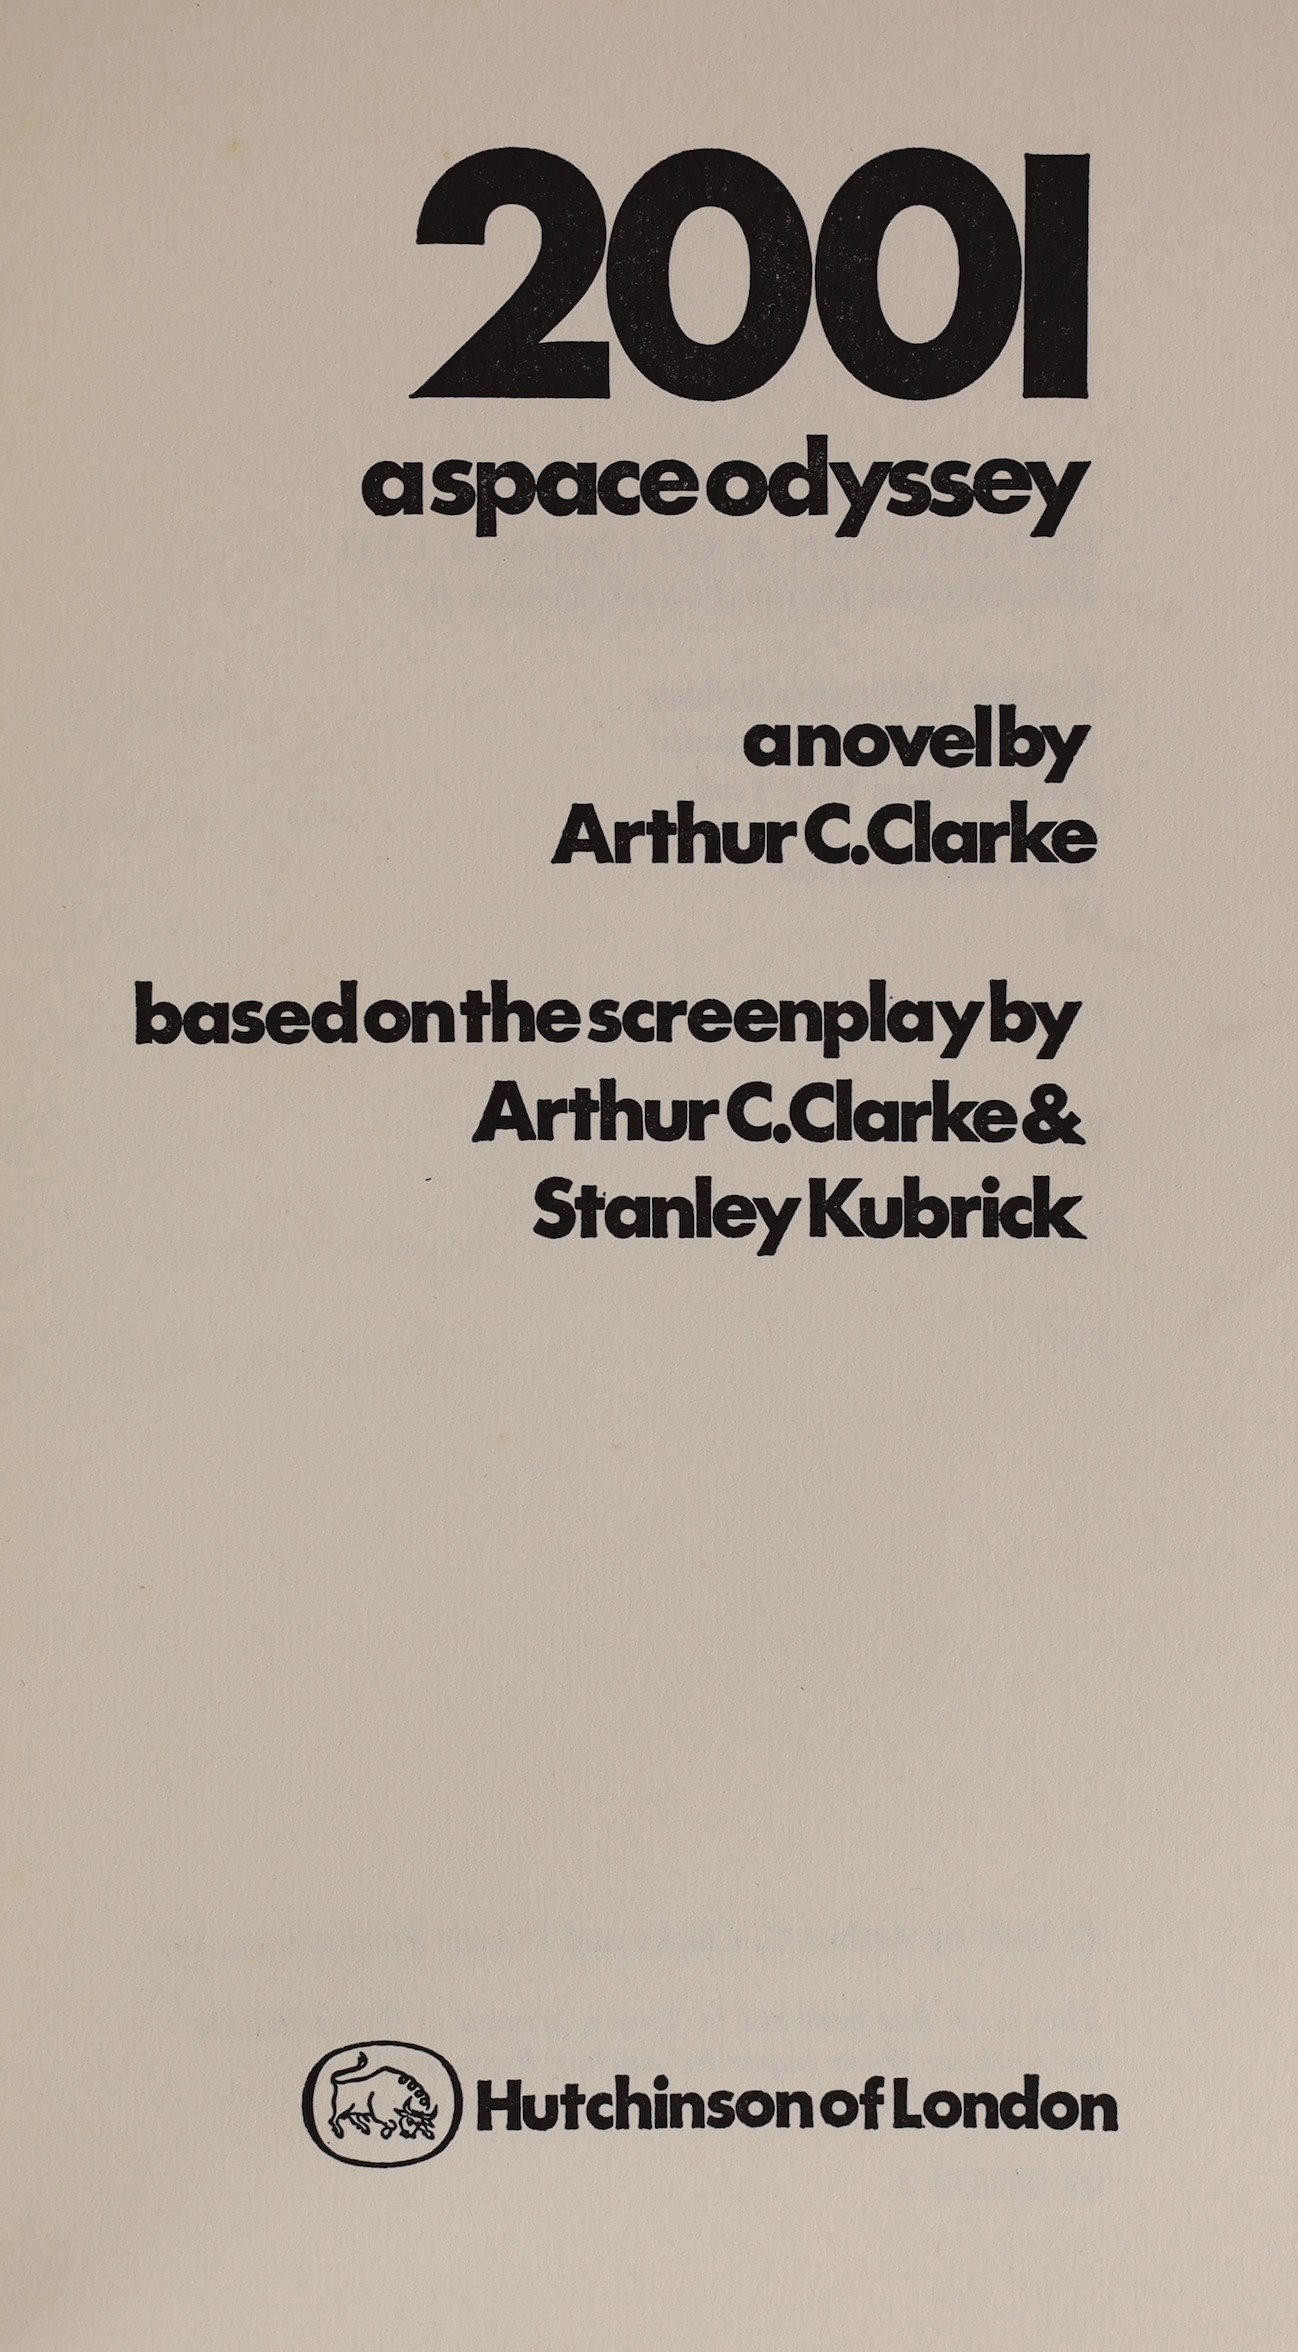 Clarke, Arthur - 2001 A Space Odyssey, 8vo, original black cloth with silver lettering to spine, Hutchison, London, 1968                                                                                                    